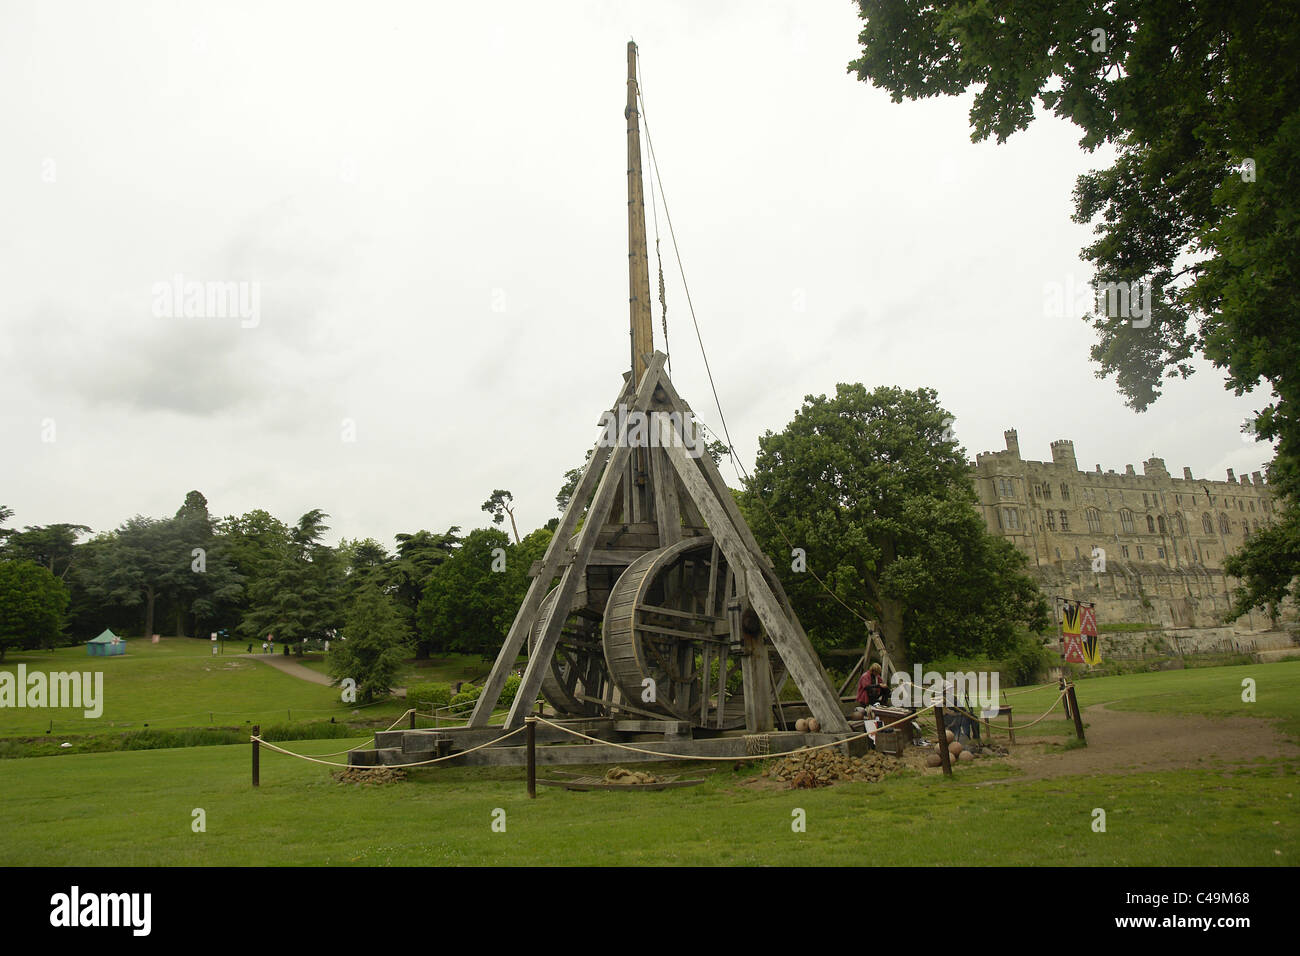 The trebuchet is a compound machine that makes use of the mechanical advantage of a lever to throw a projectile. this Trebuchet is at Warwick Castle, Stock Photo